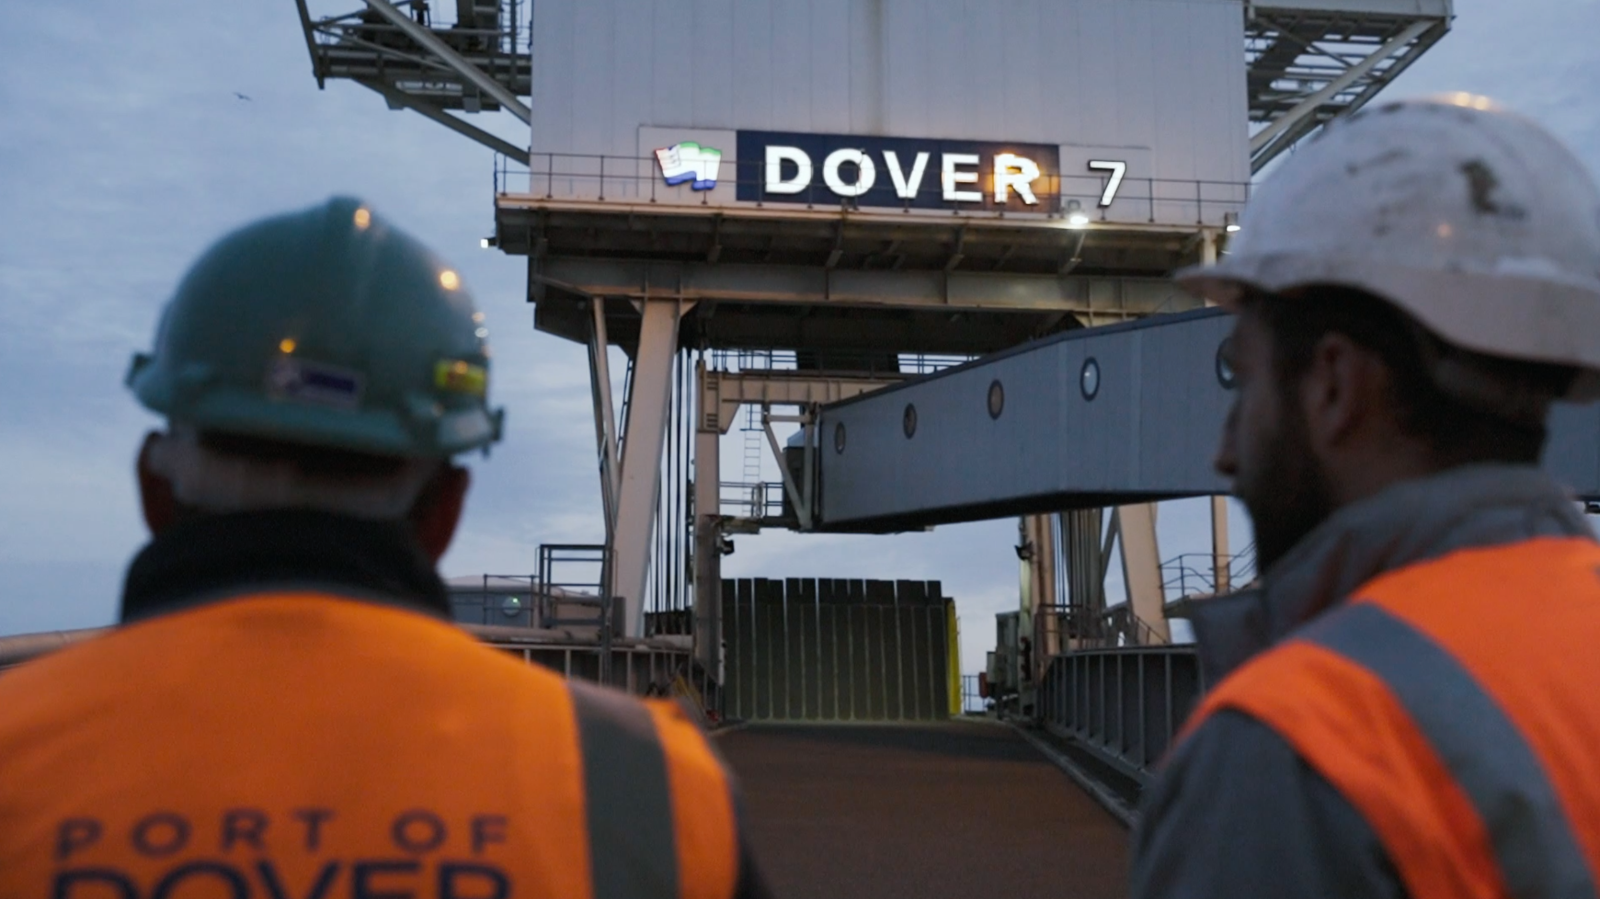 Two people walking on the Dover linkspan at dusk filmed by 93ft Sheffield for Beegrip promotional film